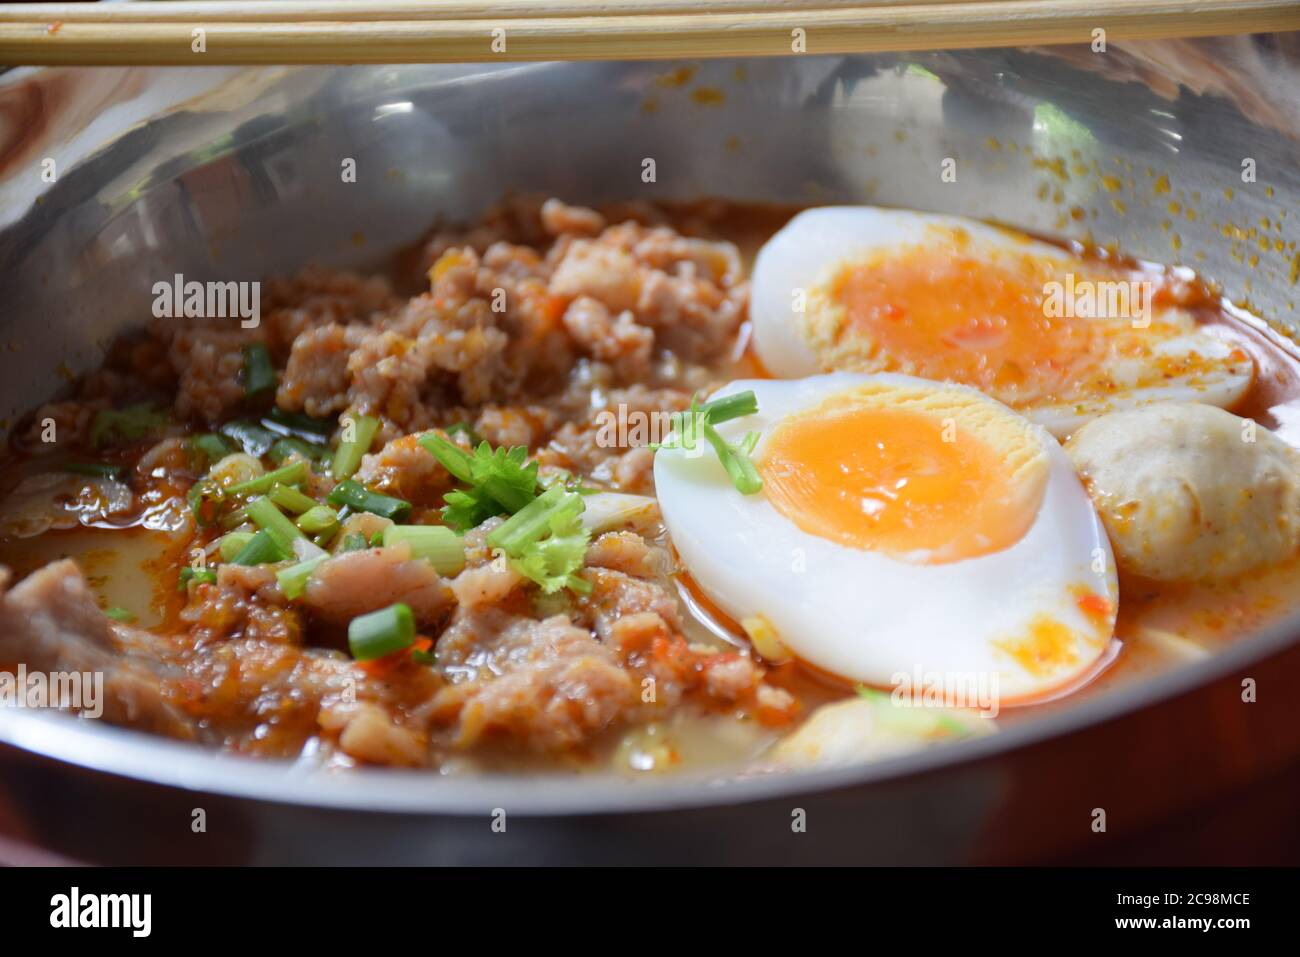 Minced pork noodles and boil egg with tom yum soup Stock Photo